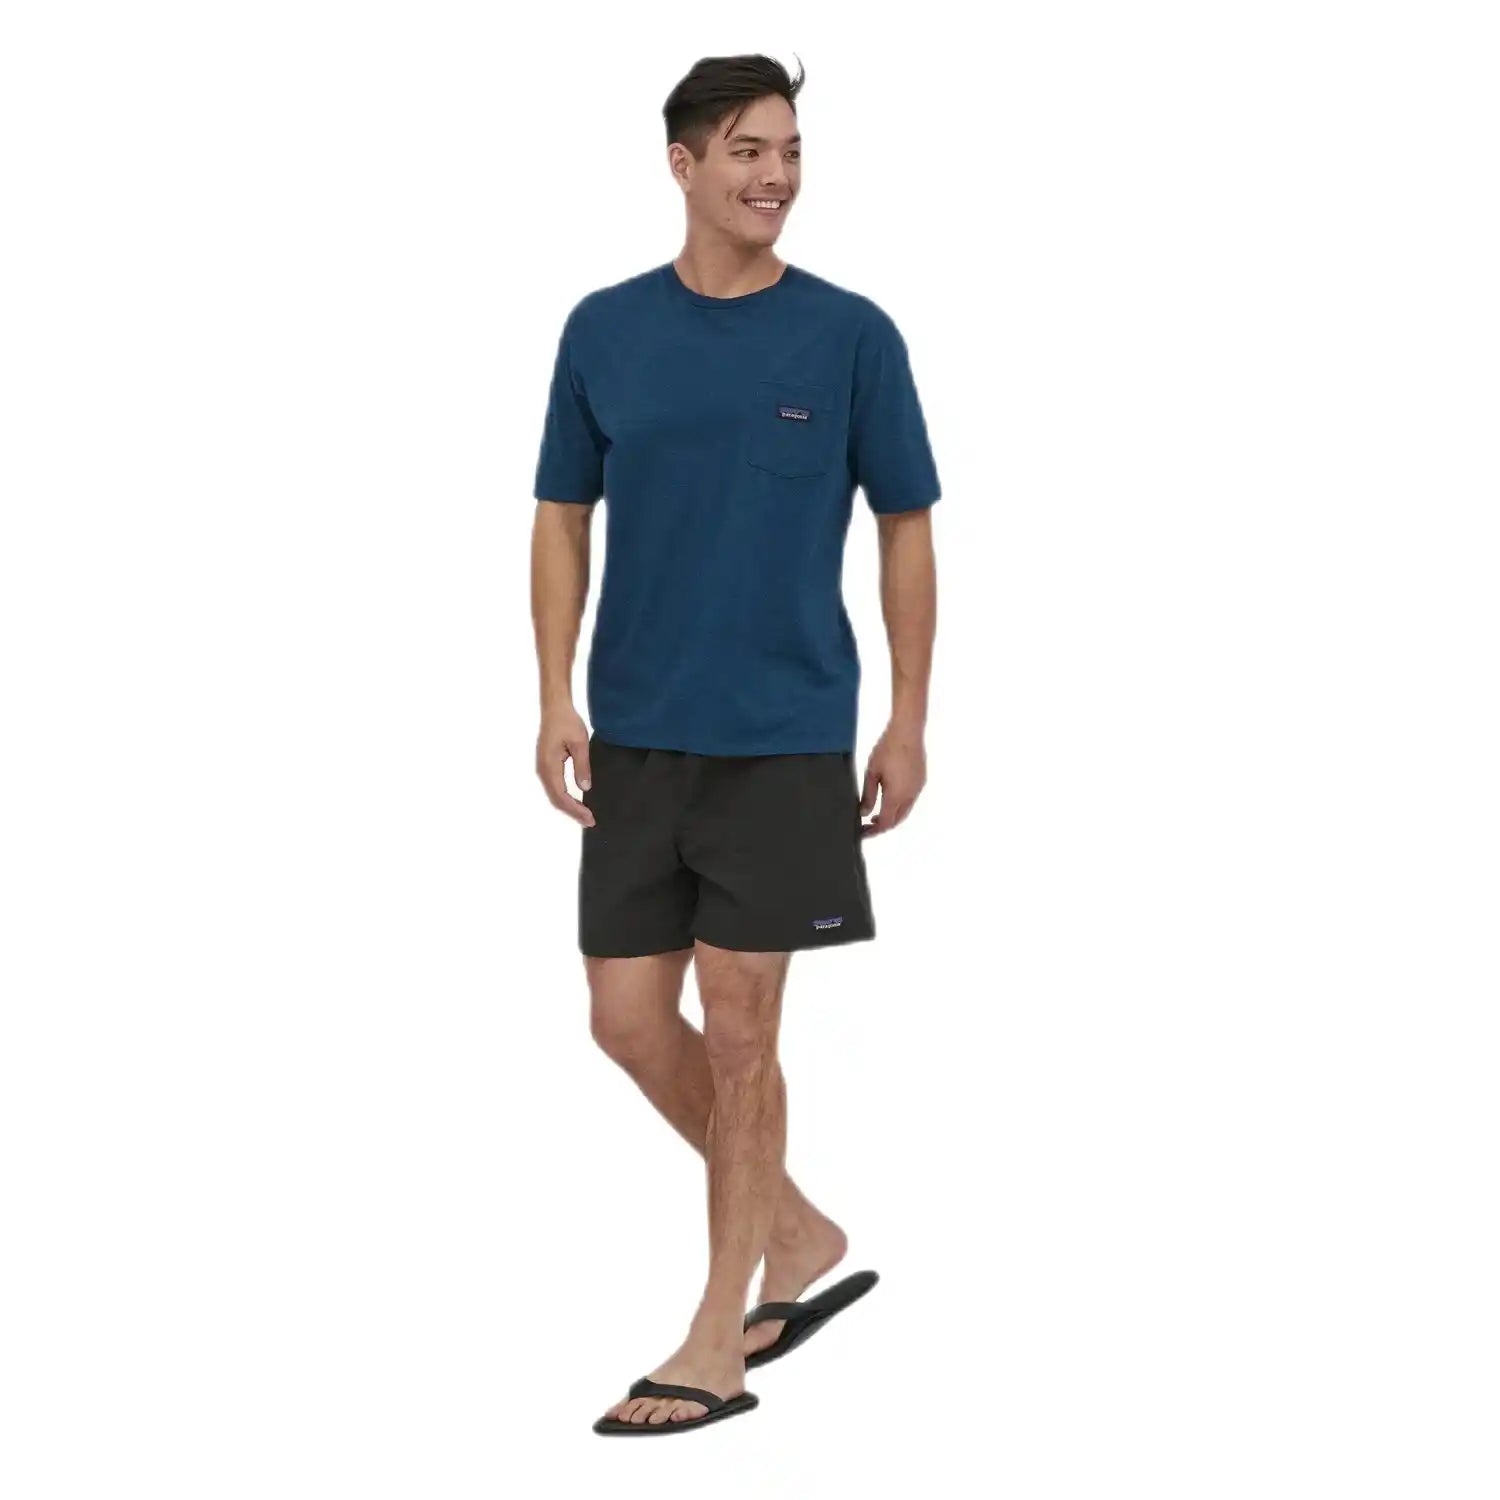 Patagonia M's Baggies™ Shorts - 5", Black, front view on model